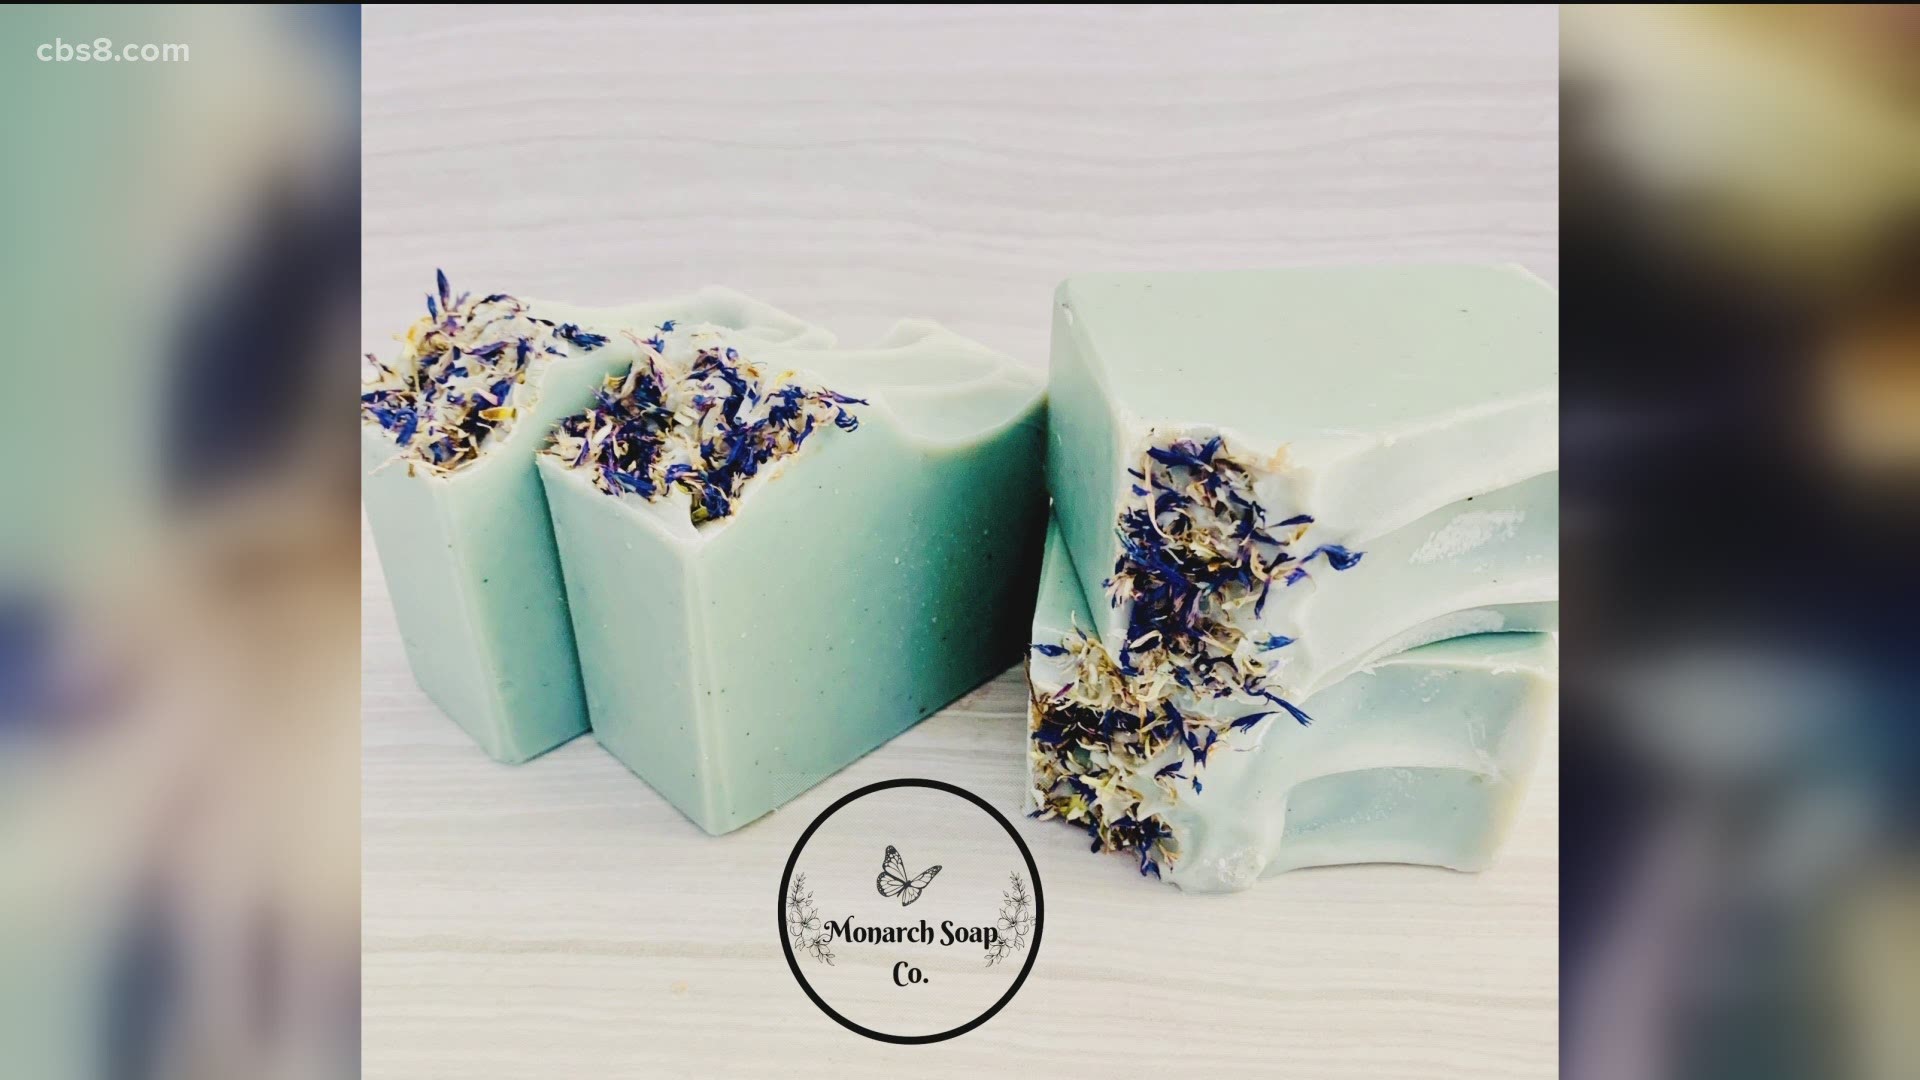 The company specializes in organic, handmade soaps rich in natural glycerin and are plant-based and palm-oil free.